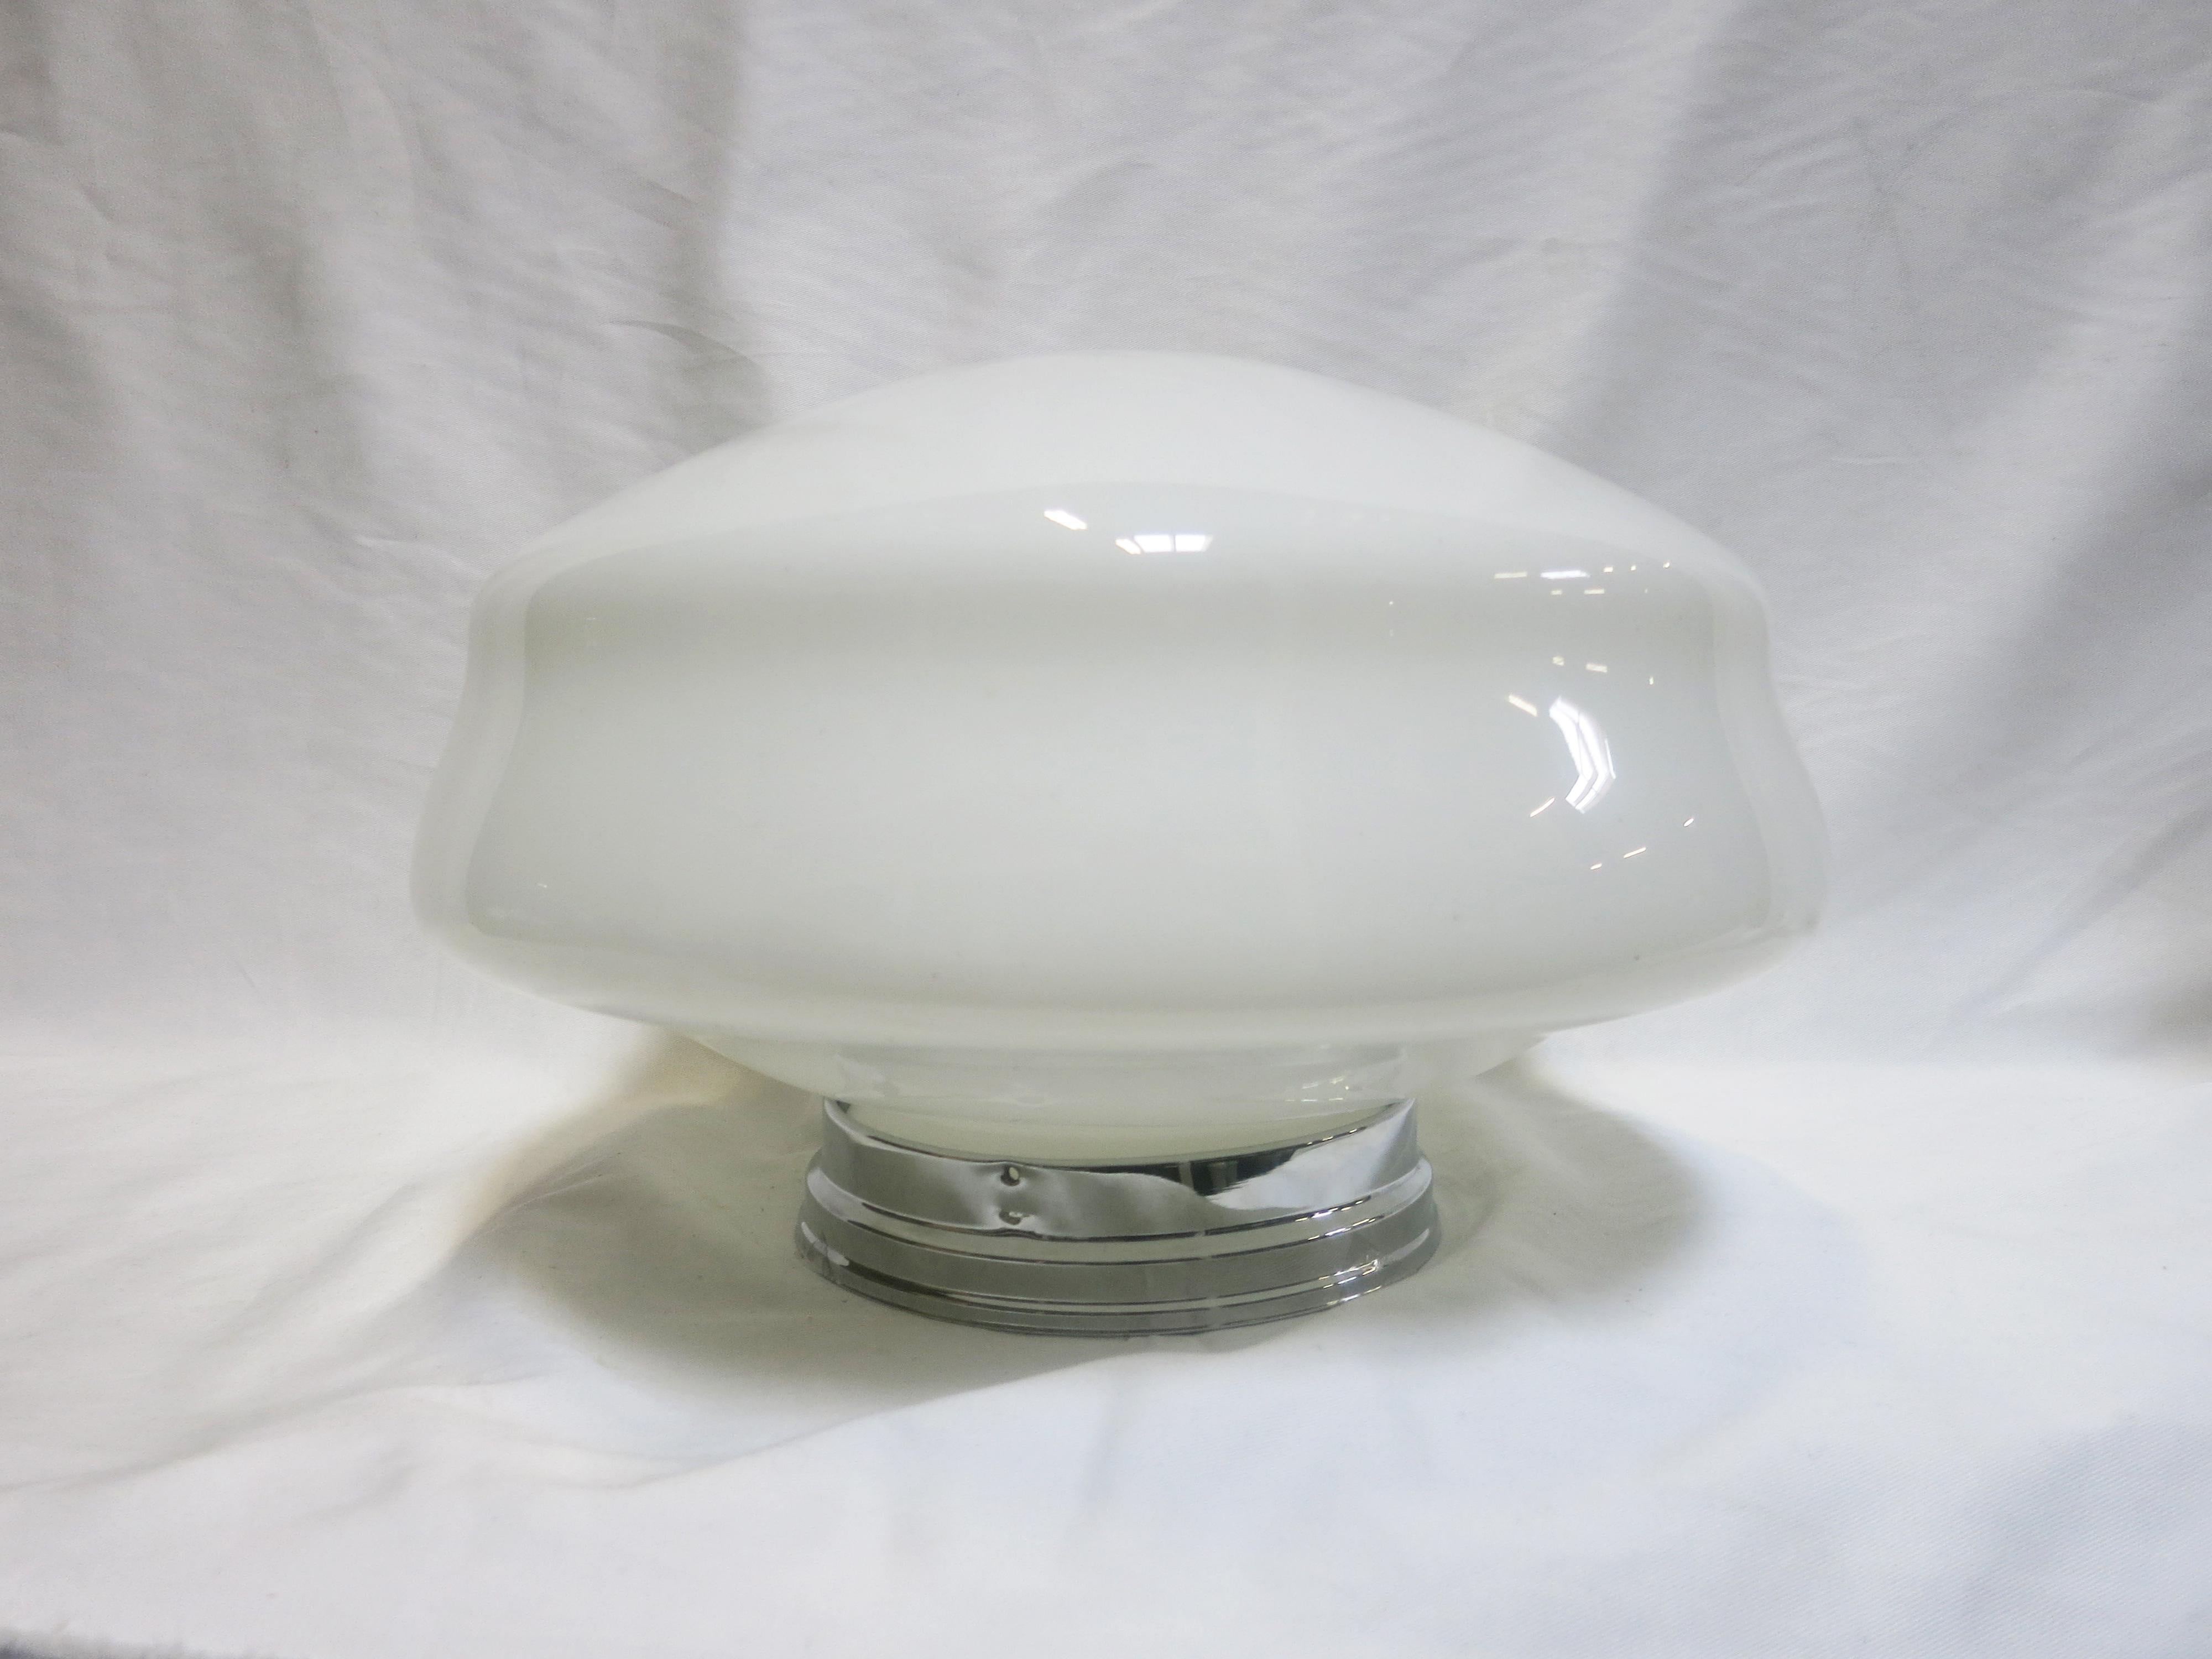 Once used everywhere from classrooms, libraries and courthouses alike, schoolhouse globes offered a practical and utilitarian design with solid, hard-working ambient lighting. Our globe features an oval dome shape in Classic white milk glass that